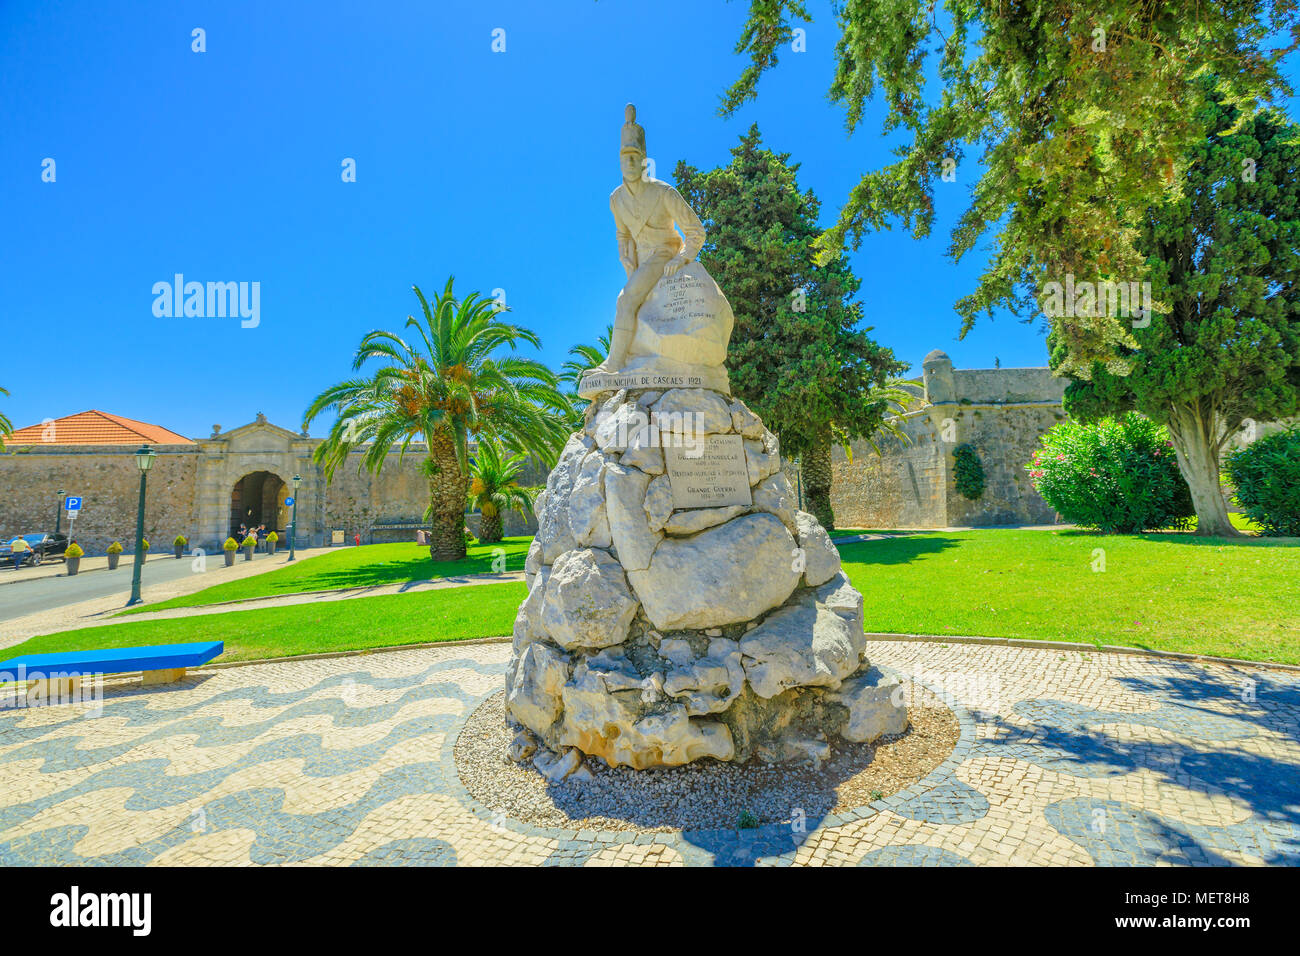 Cascais, Portugal - August 6, 2017: Monument Infantry Regiment or statue of Peninsular war against Cascais fortress Our Lady of Light in Cascais the most popular holiday destination on Lisbon coast. Stock Photo